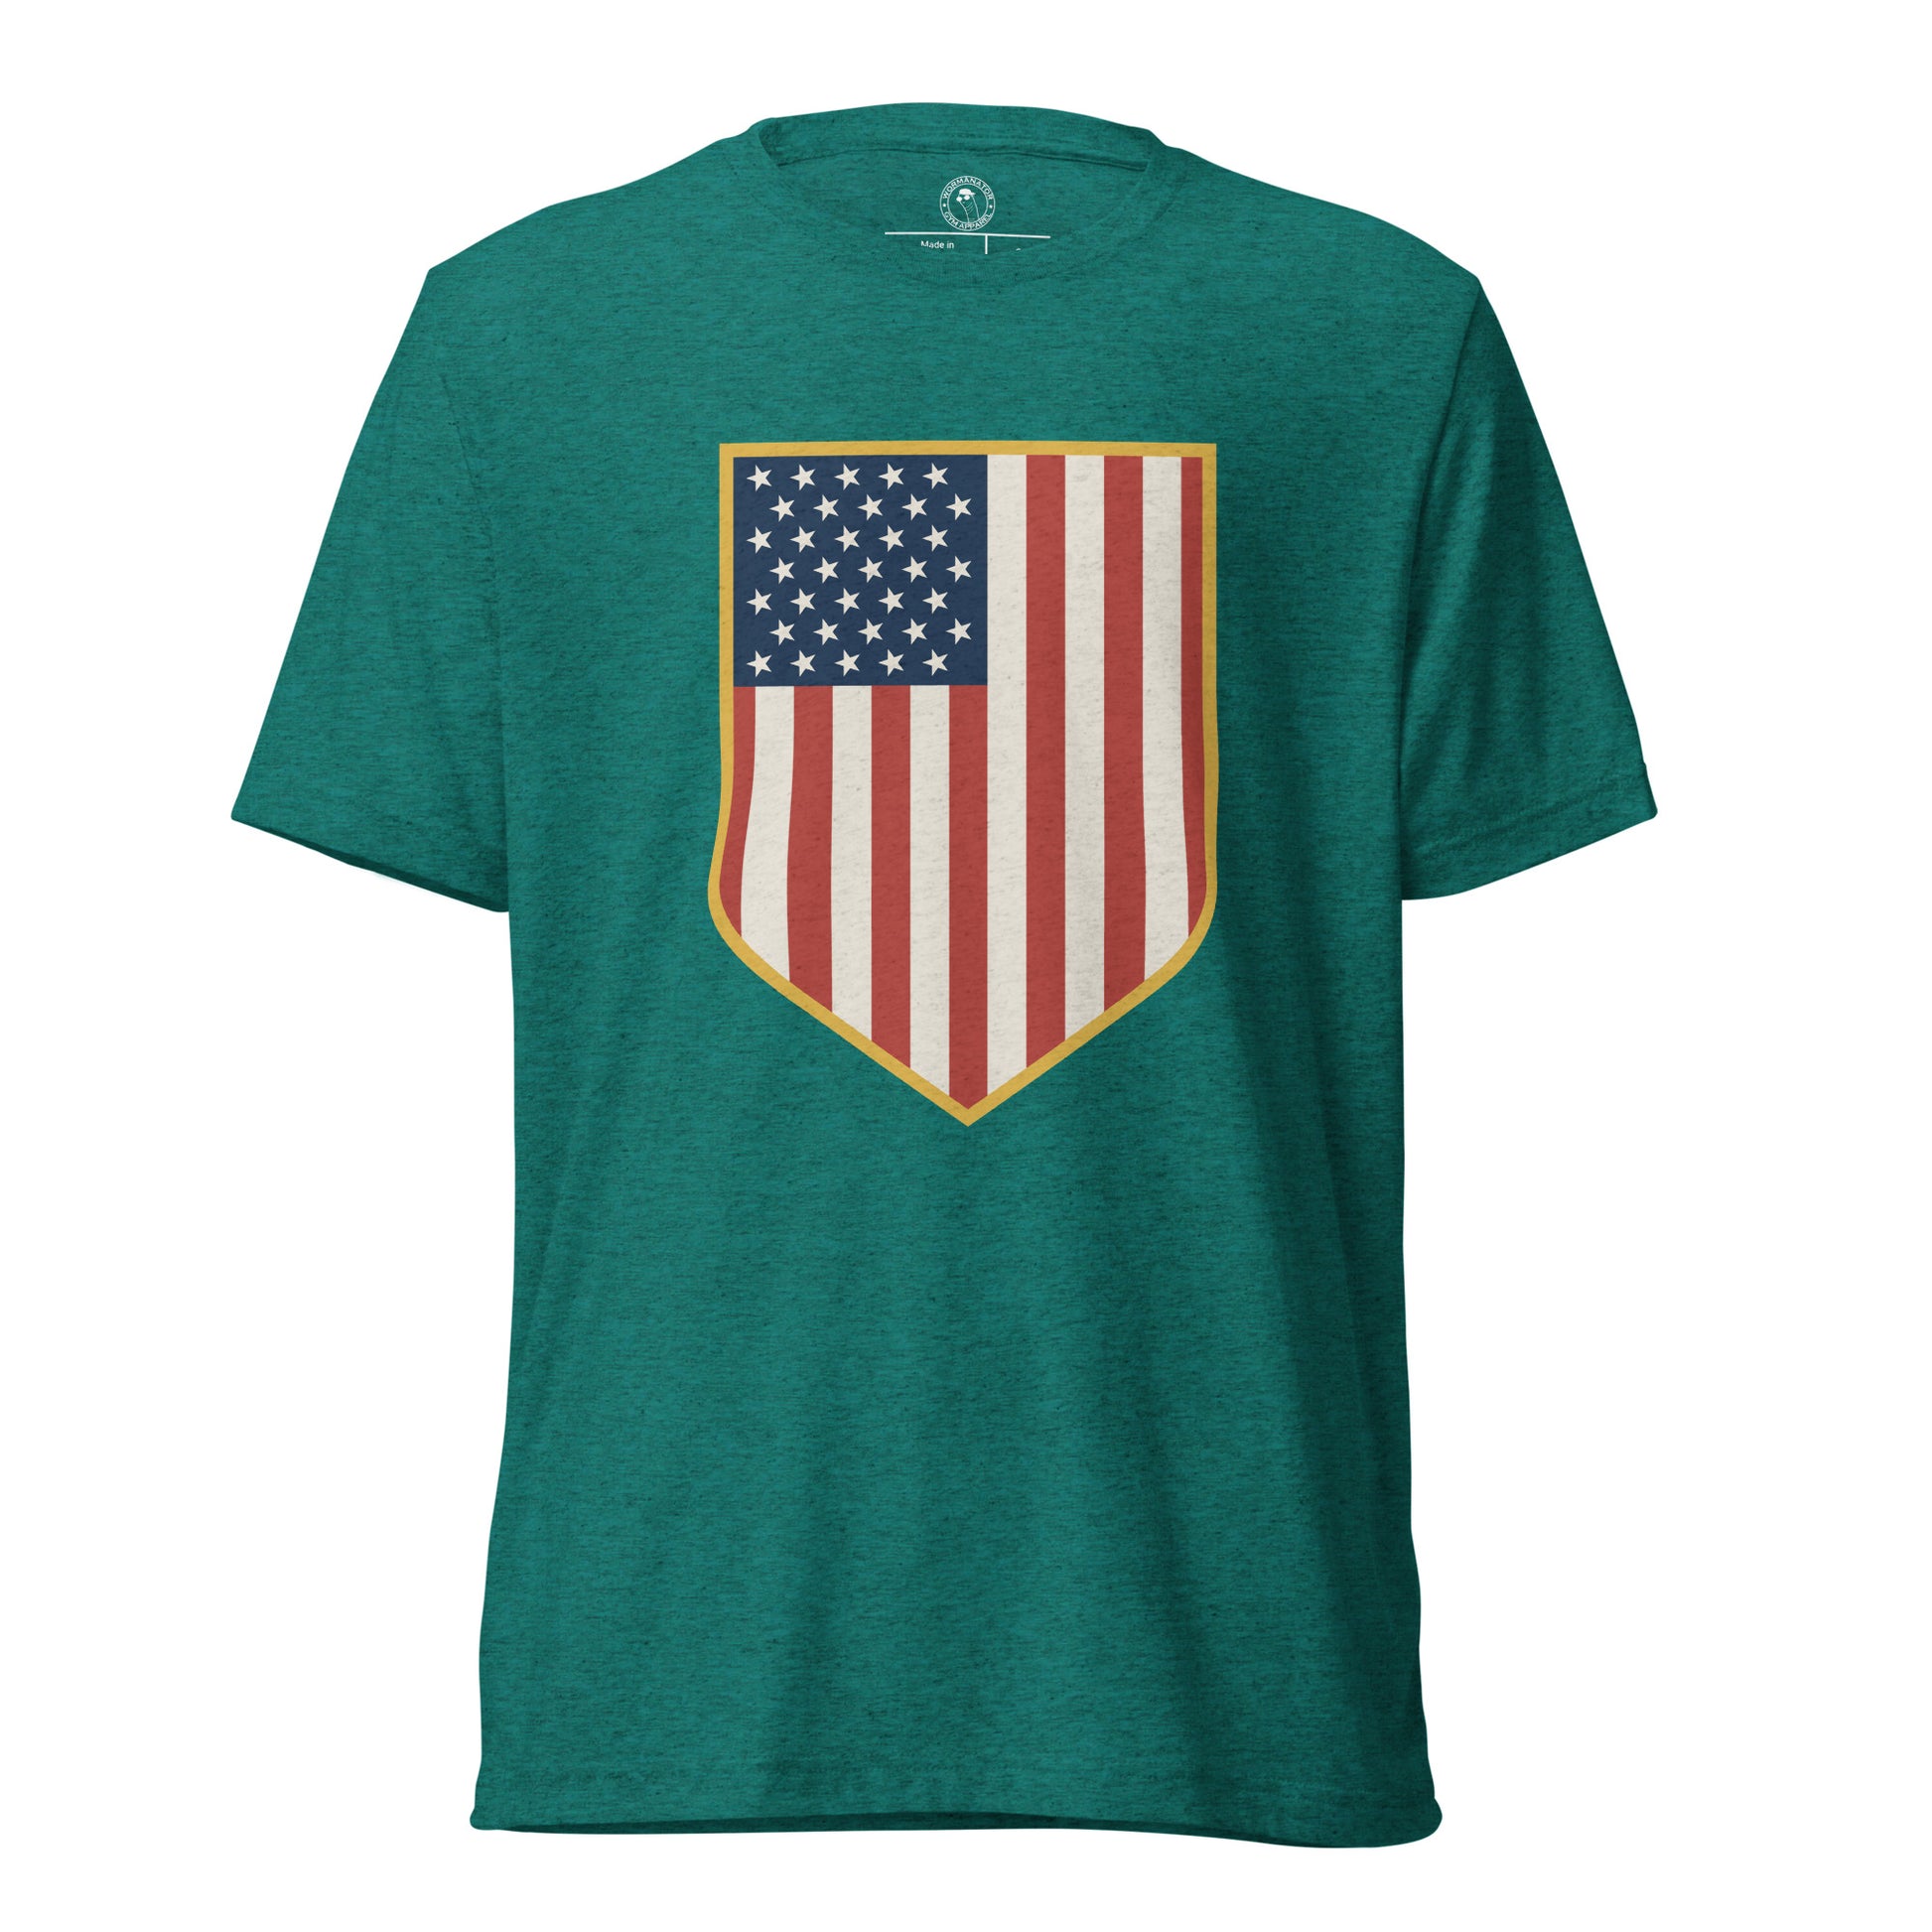 General Patton Shirt in Teal Triblend